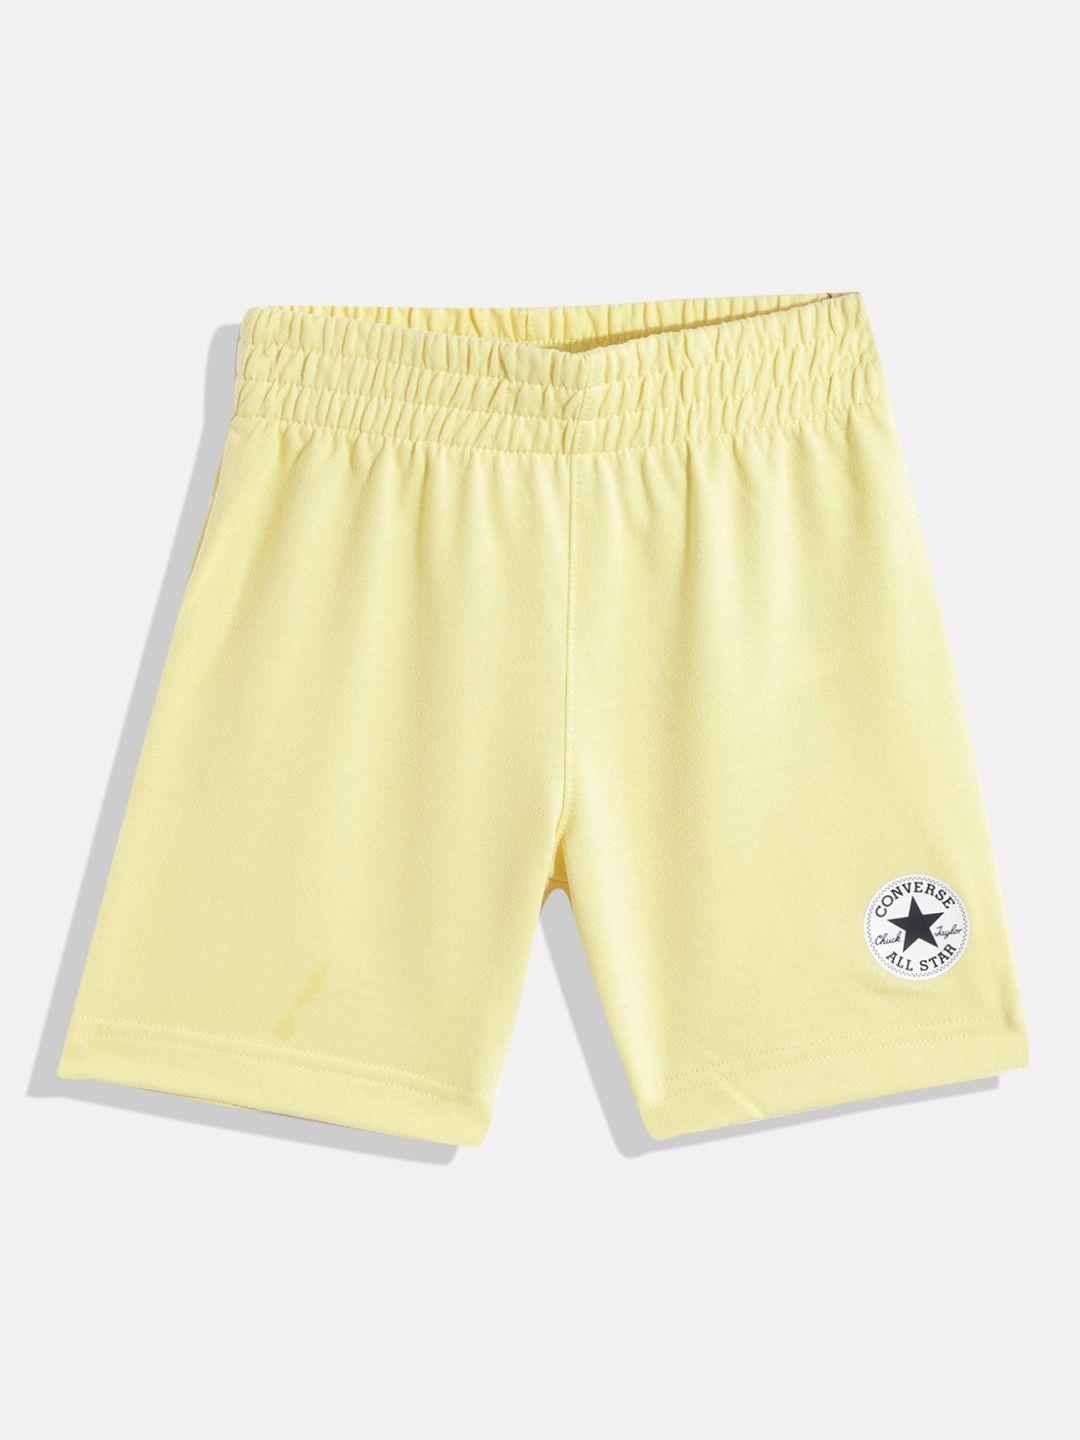 converse-boys-yellow-solid-slim-fit-shorts